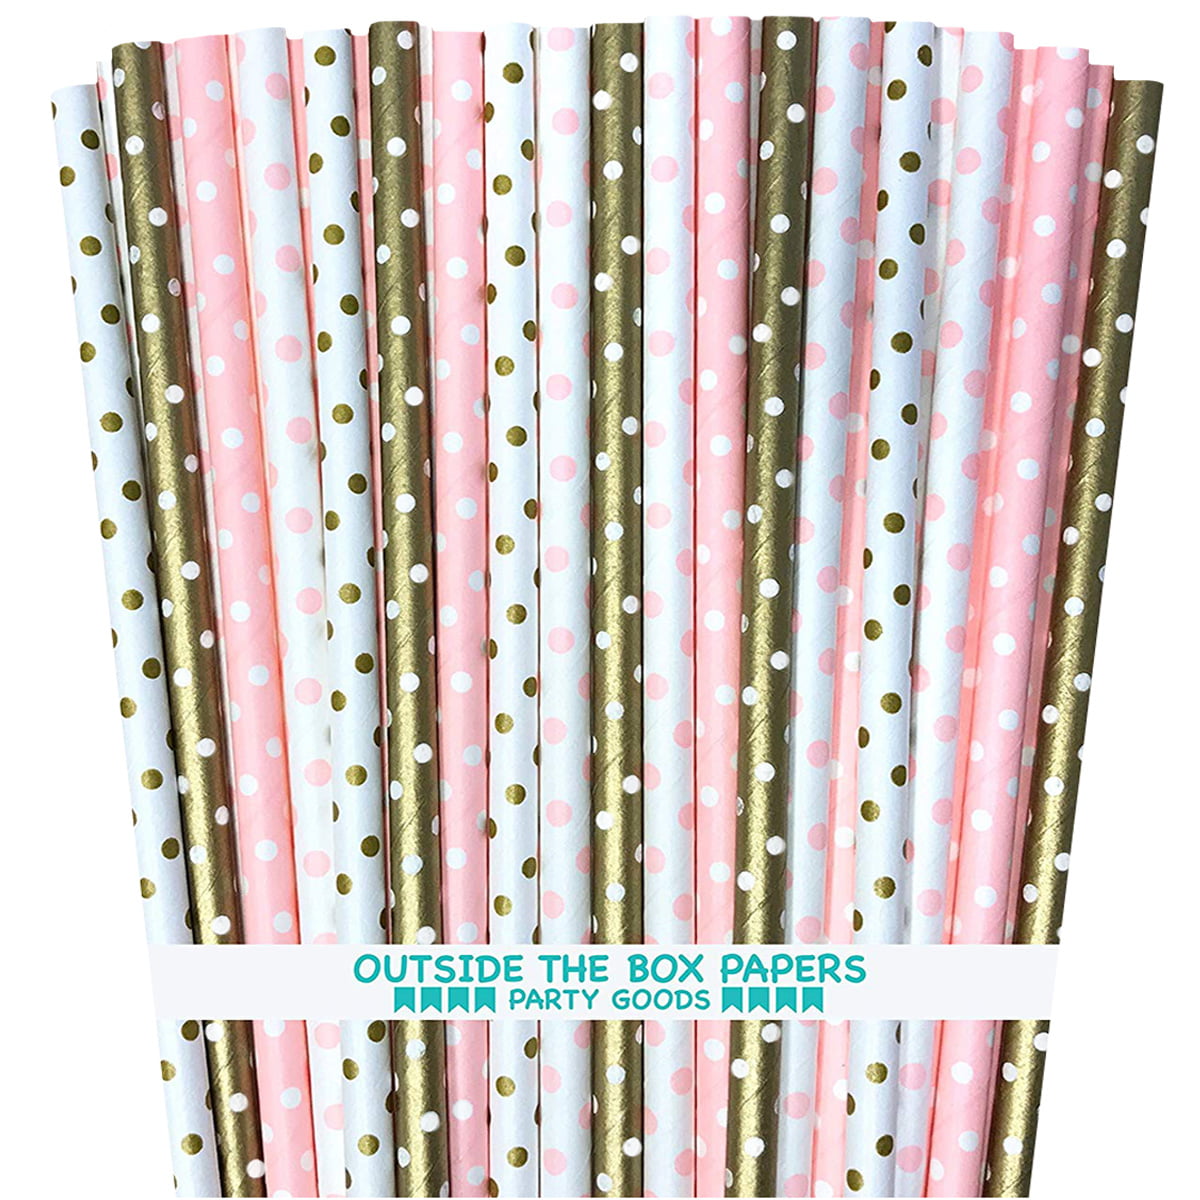 Polka Dot Paper Drinking Straws Biodegradable Disposable Party Decor 6mm Wide